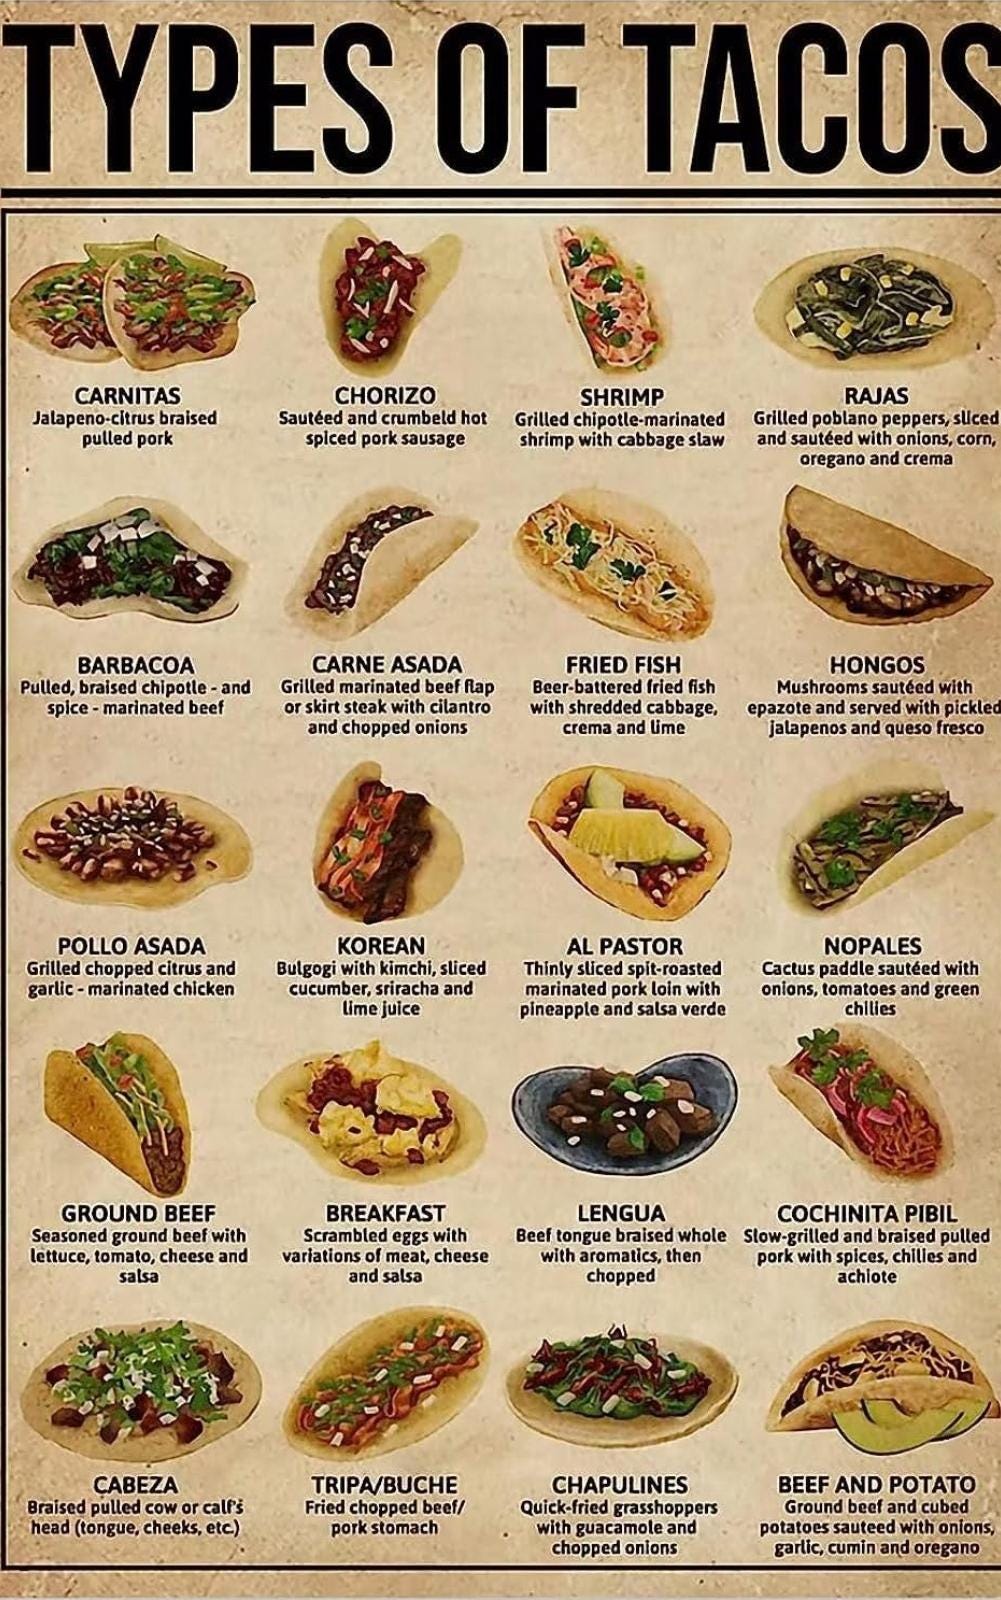 20 Types of Tacos You Must Know | Daily Infographic